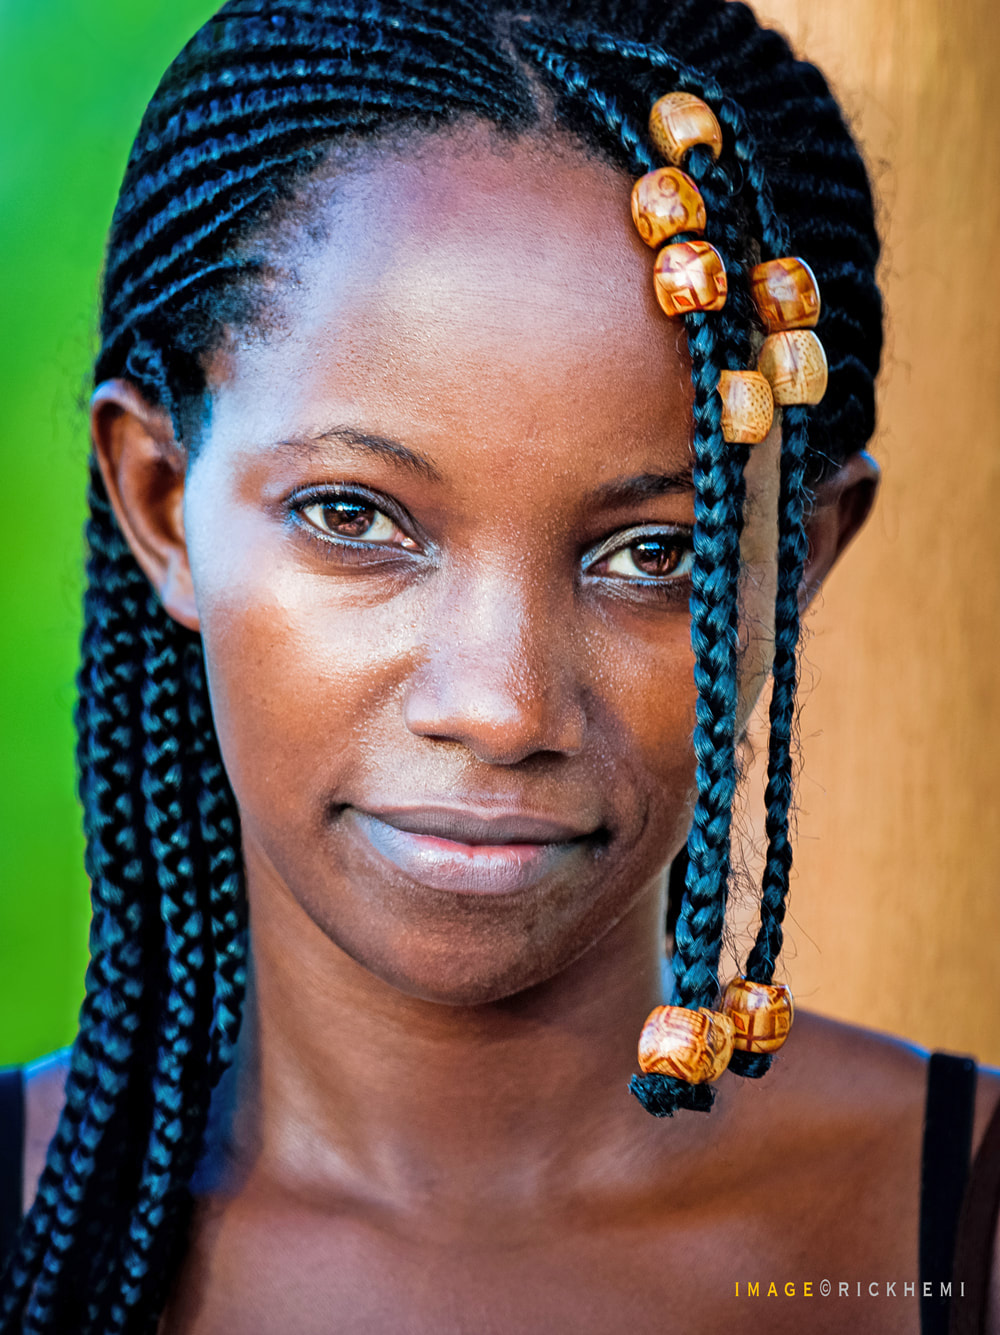 overland travel and transit Africa, street portrait, image by Rick Hemi